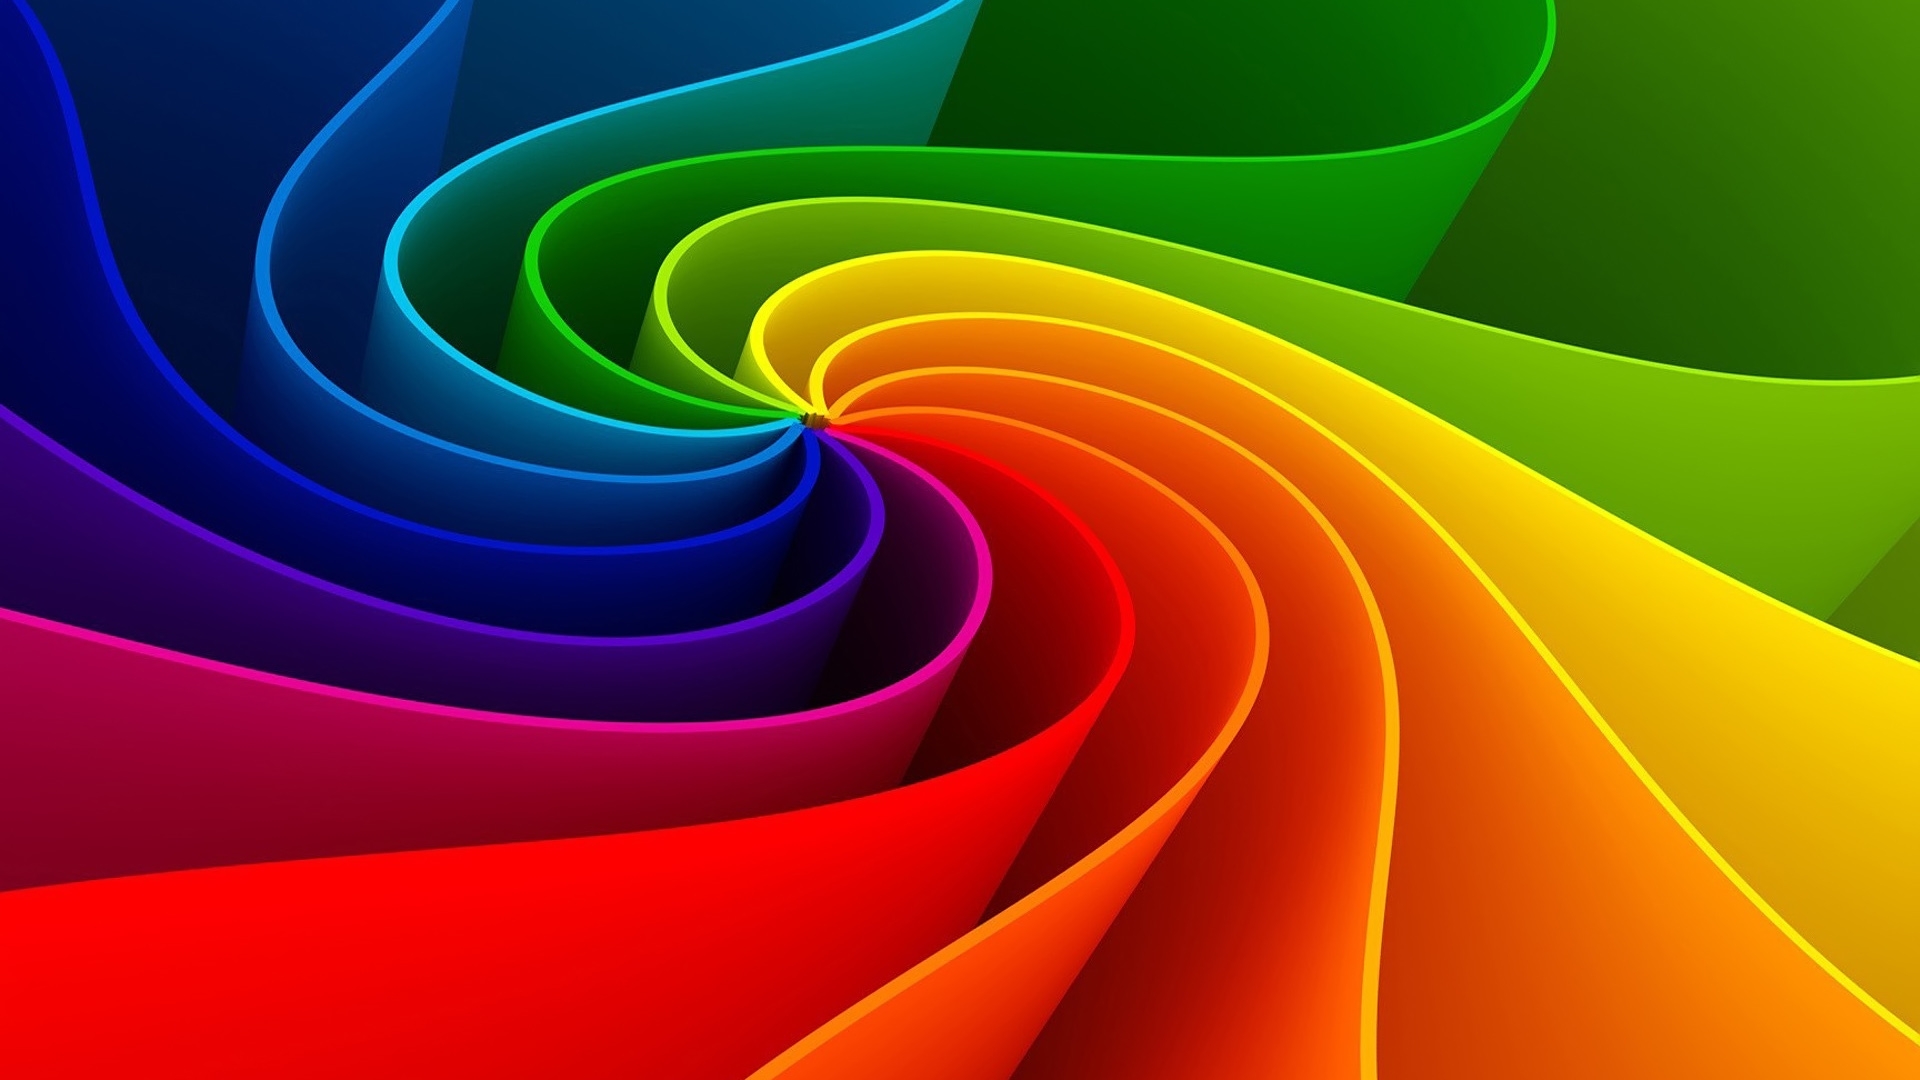 Amazing Abstract Rainbow High Definition Wallpaper HD